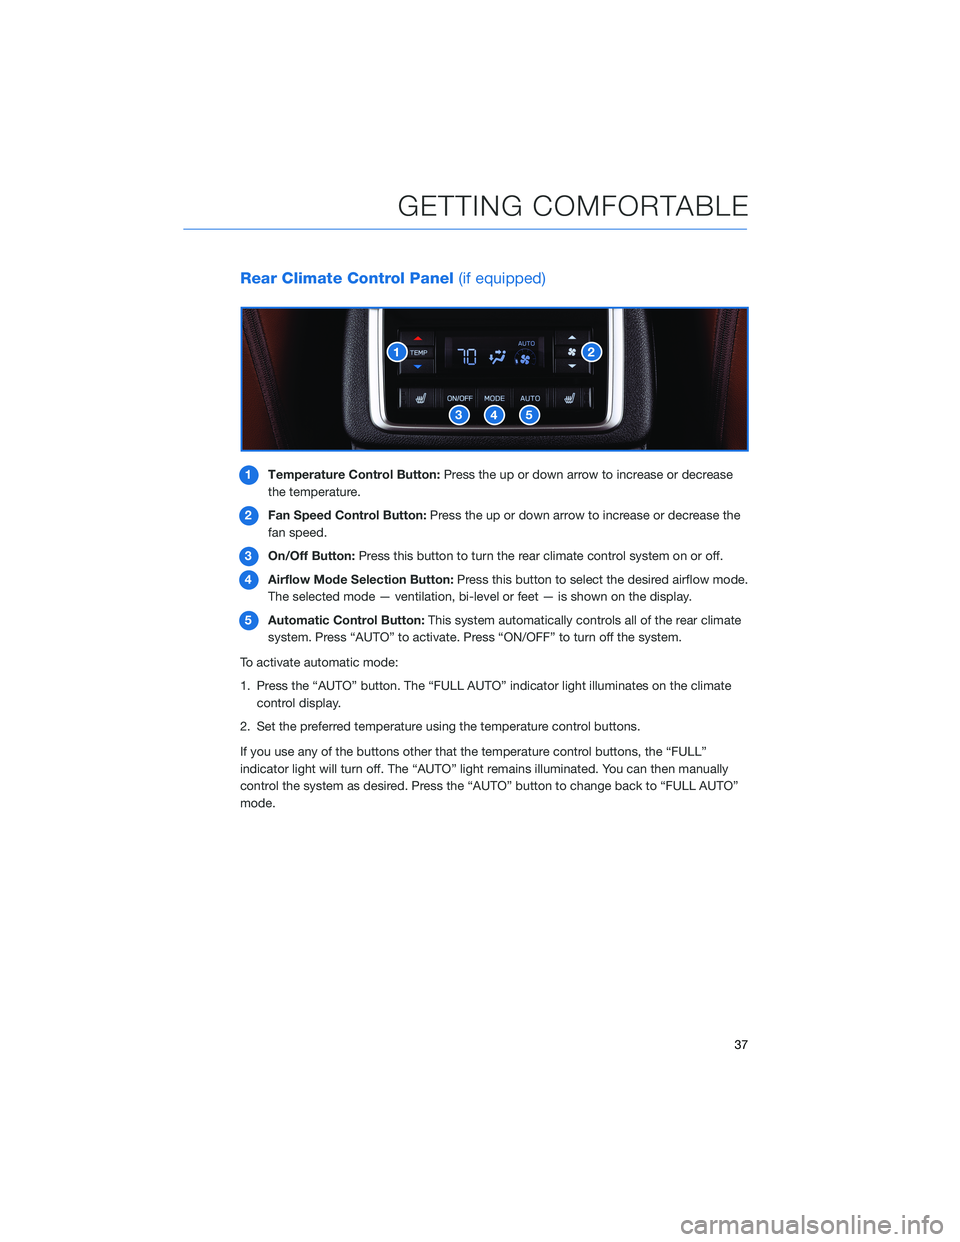 SUBARU ASCENT 2022  Getting Started Guide Rear Climate Control Panel(if equipped)
1Temperature Control Button:Press the up or down arrow to increase or decrease
the temperature.
2Fan Speed Control Button:Press the up or down arrow to increase